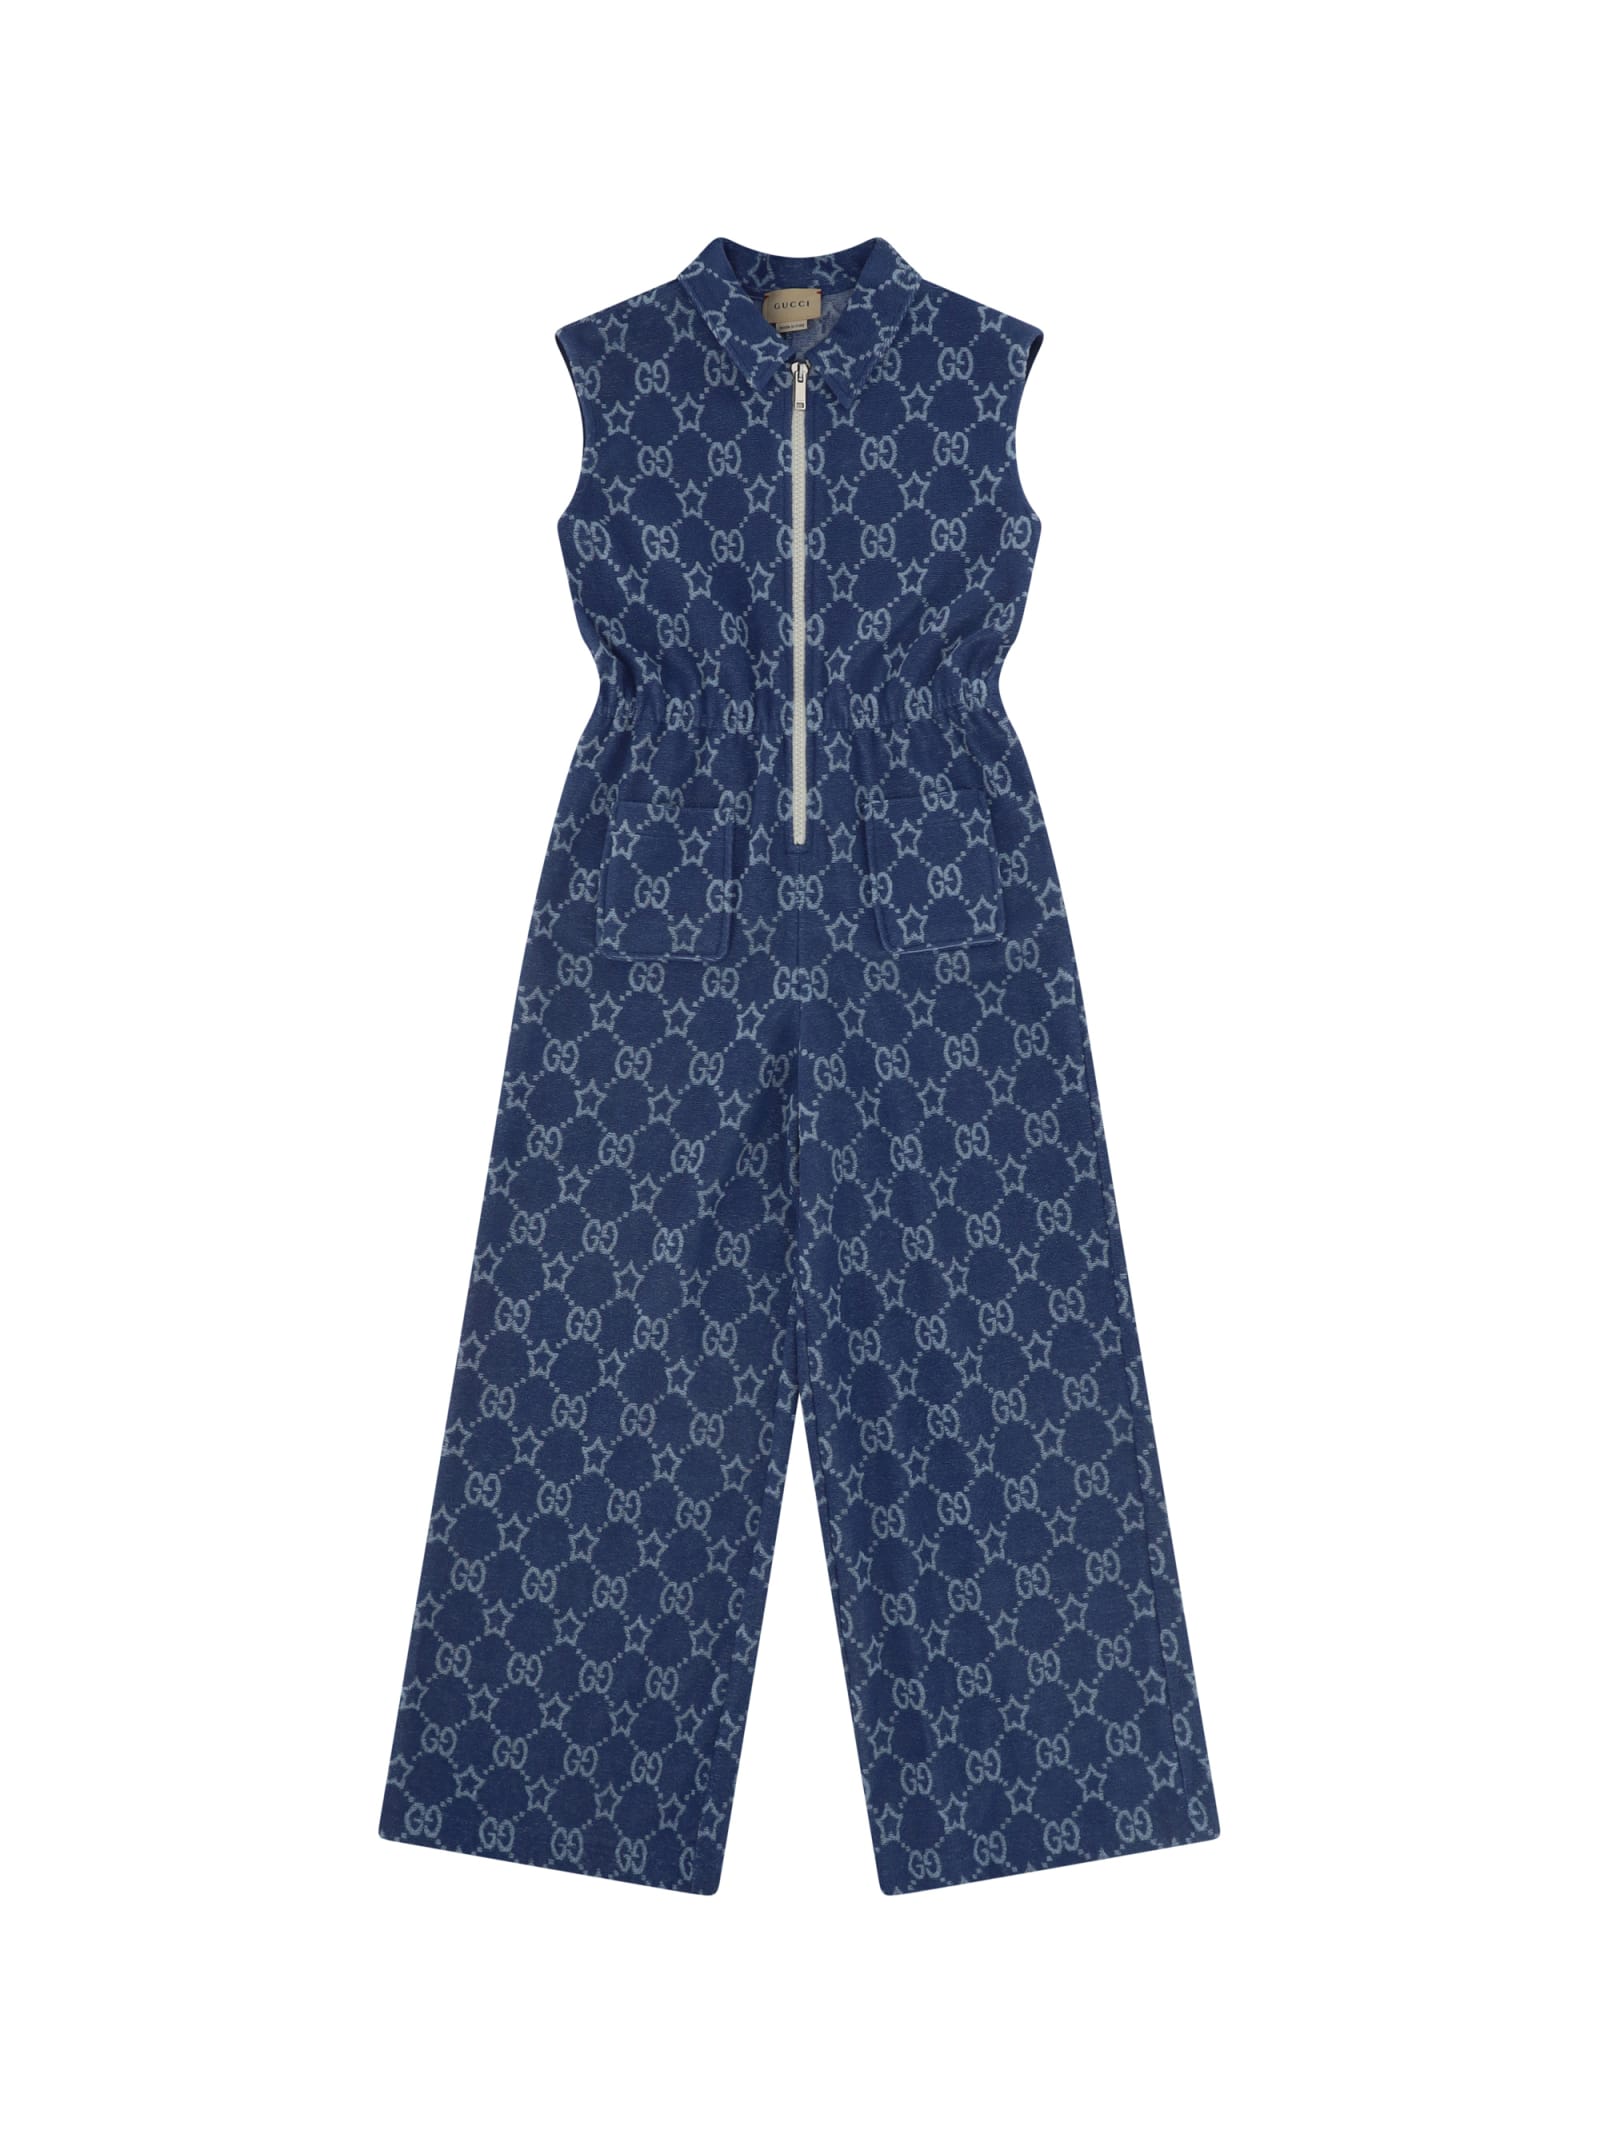 GUCCI JUMPSUIT DRESS FOR GIRL